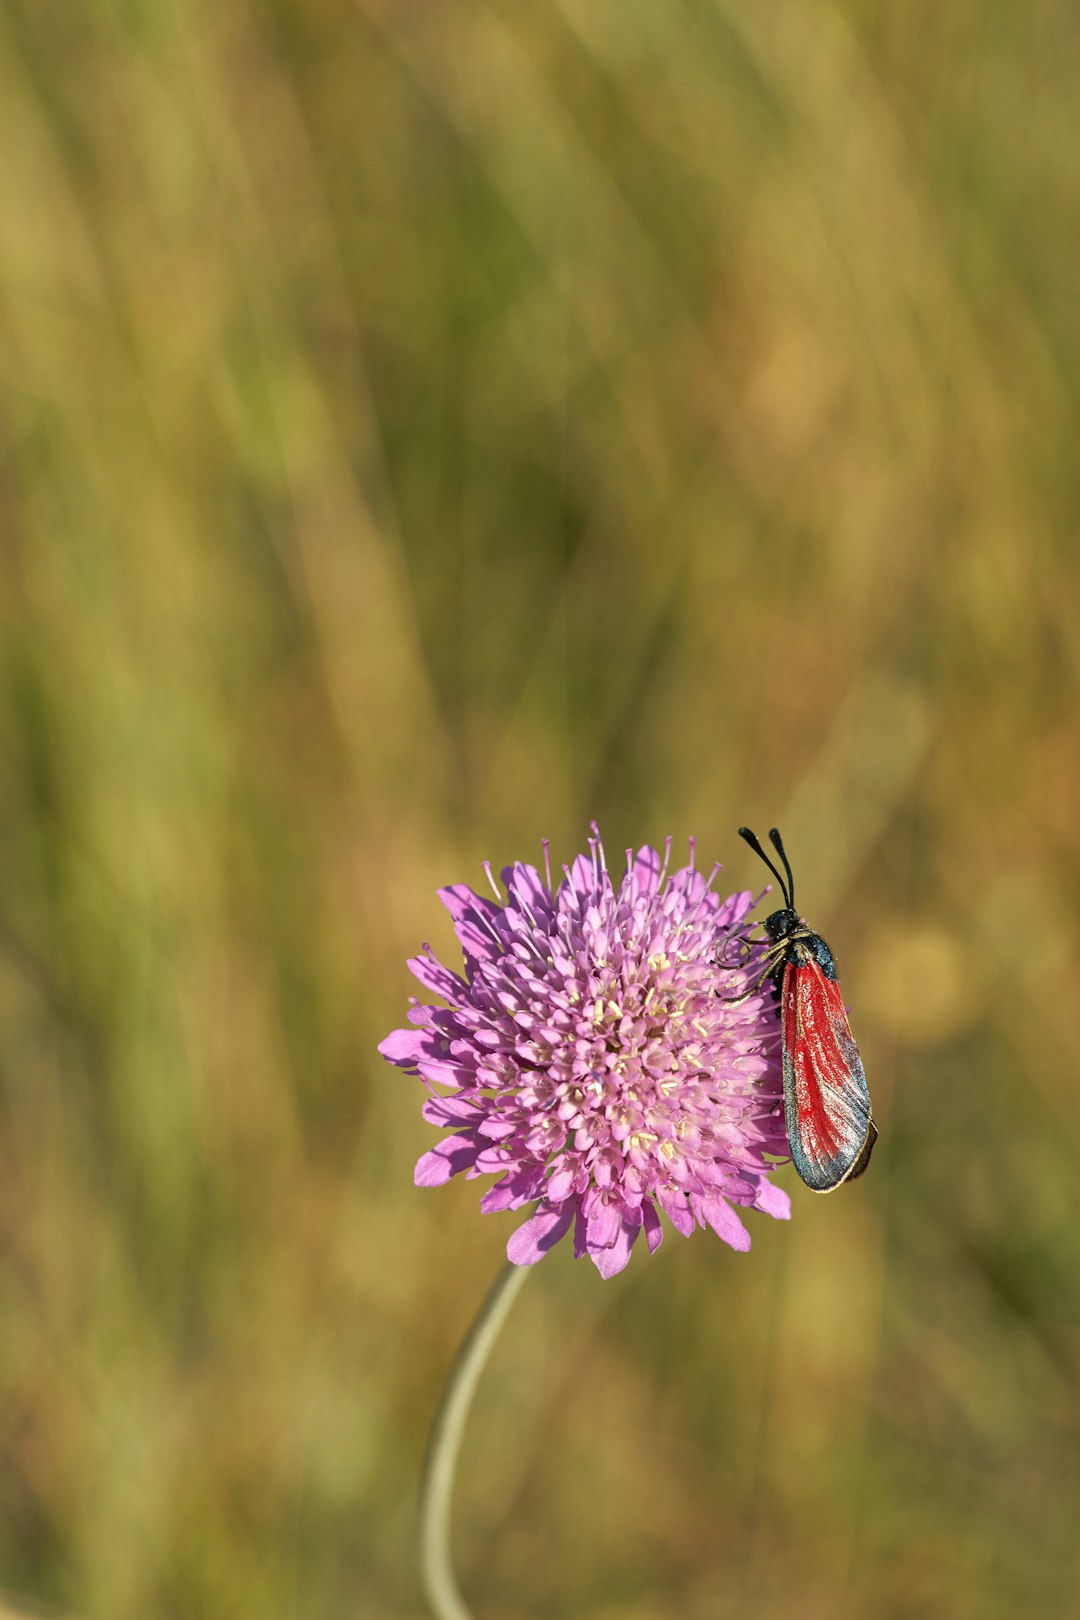 black and red butterfly perched on purple flower in close up photography during daytime